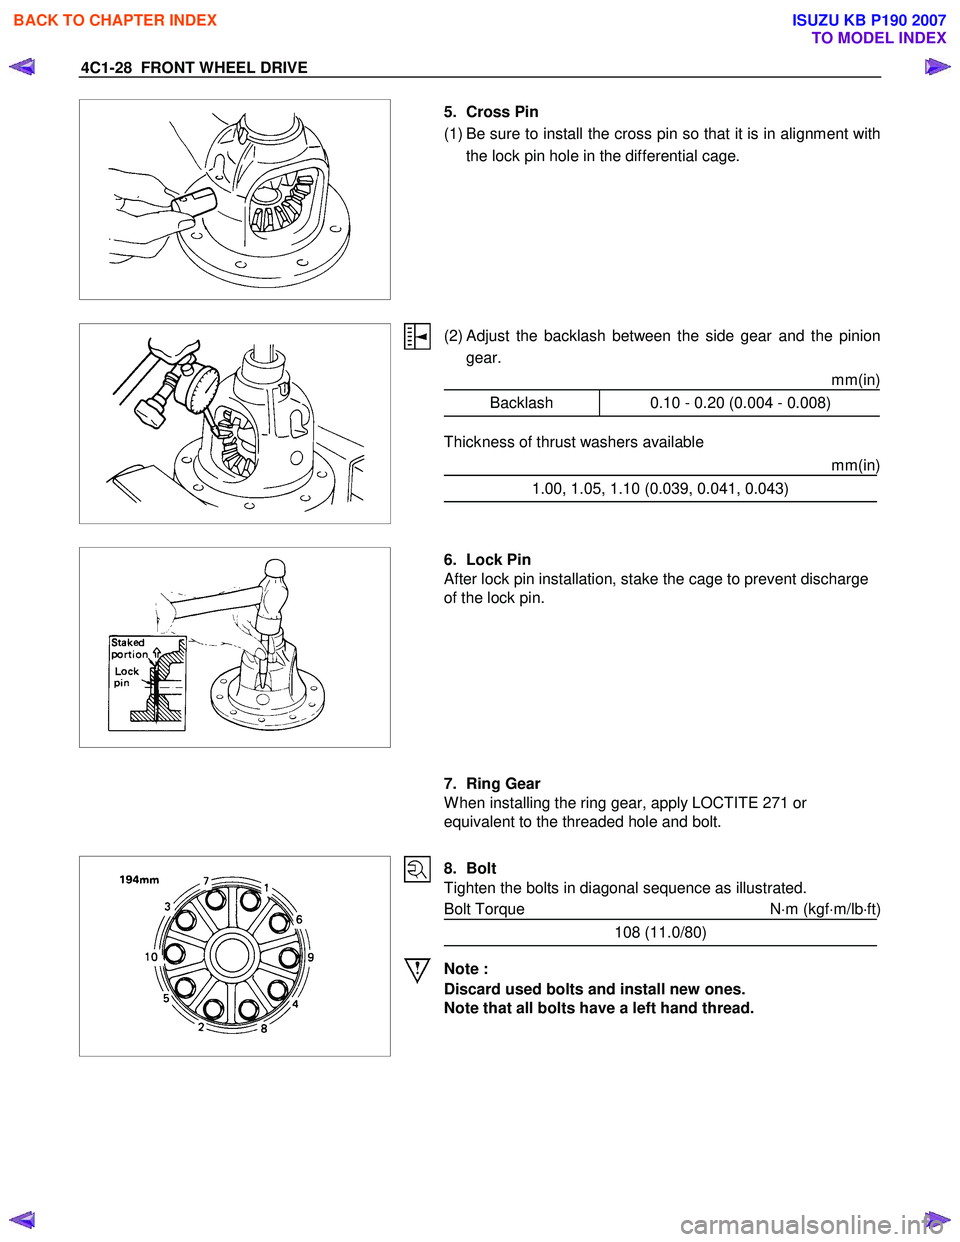 ISUZU KB P190 2007  Workshop Owners Manual 4C1-28  FRONT WHEEL DRIVE 
 
  
  5. Cross Pin  
(1) Be sure to install the cross pin so that it is in alignment with the lock pin hole in the differential cage. 
 
 
  
  (2) Adjust the backlash betw